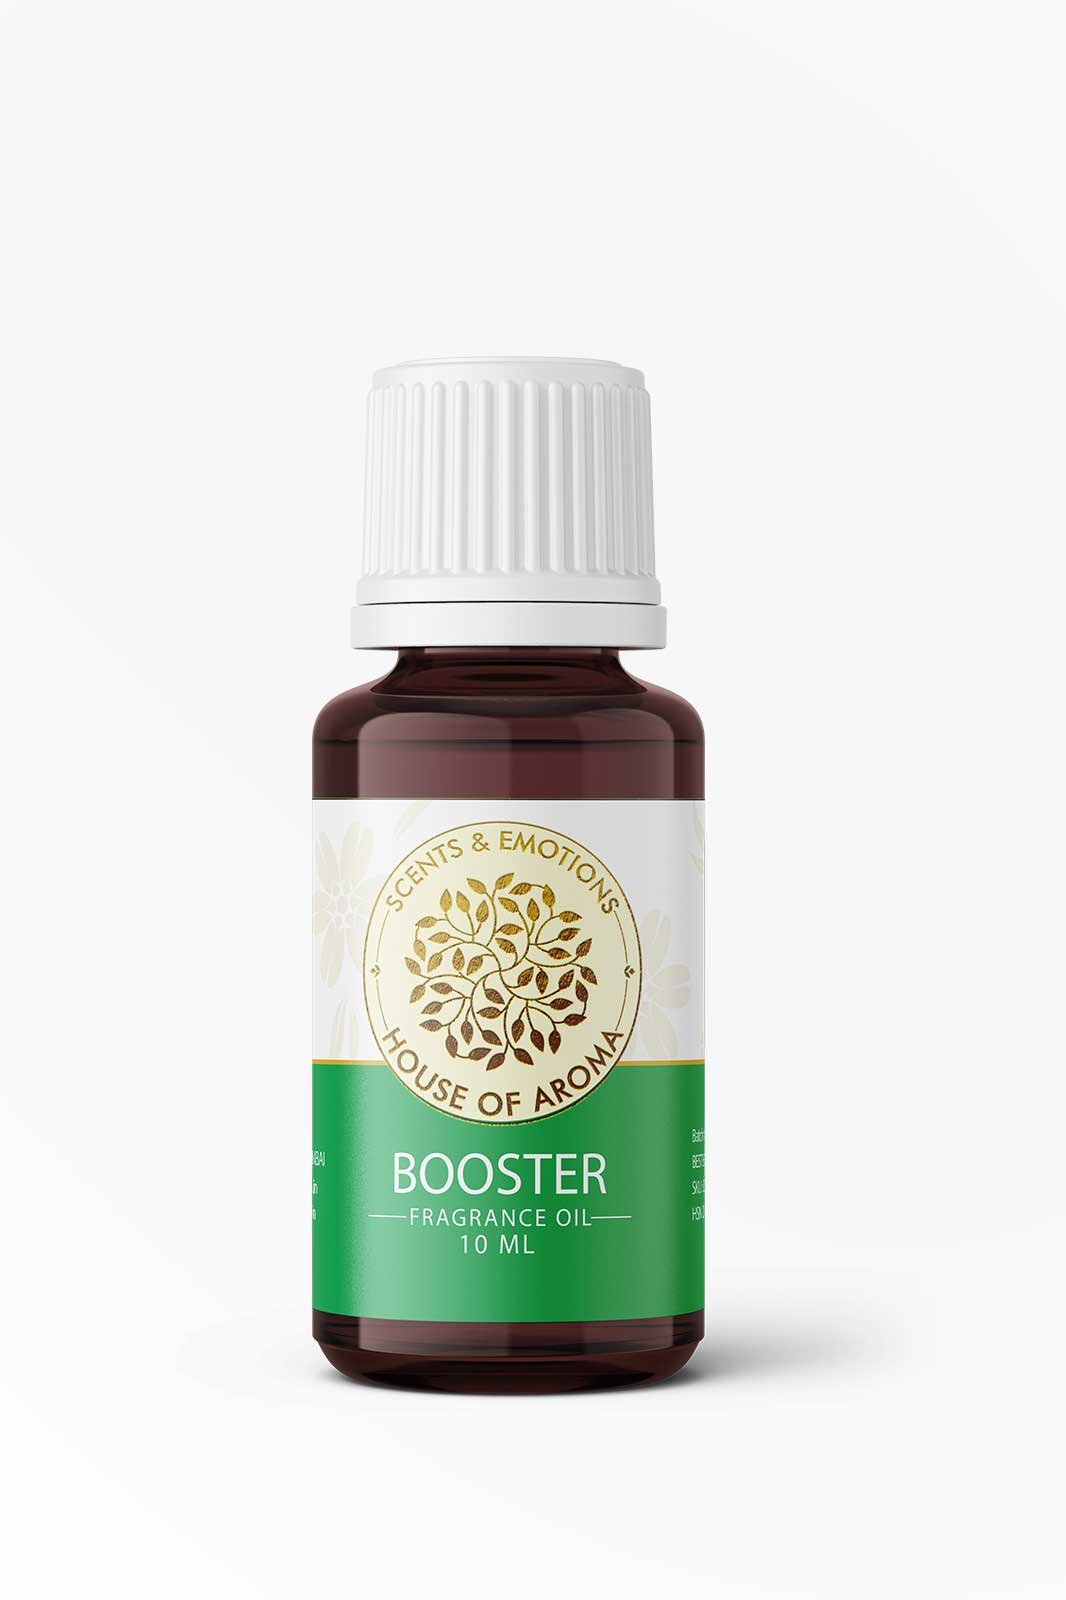 Booster fragrance oil, Booster oil, Fragrance oil, Booster oil for skin, Scented fragrance oil, Fragrance oil in diffuser, fragrance oil diffuser, hair booster oil benefits, dandruff control booster oil shots, fragrance oil diffuser, candle oil, house of aroma